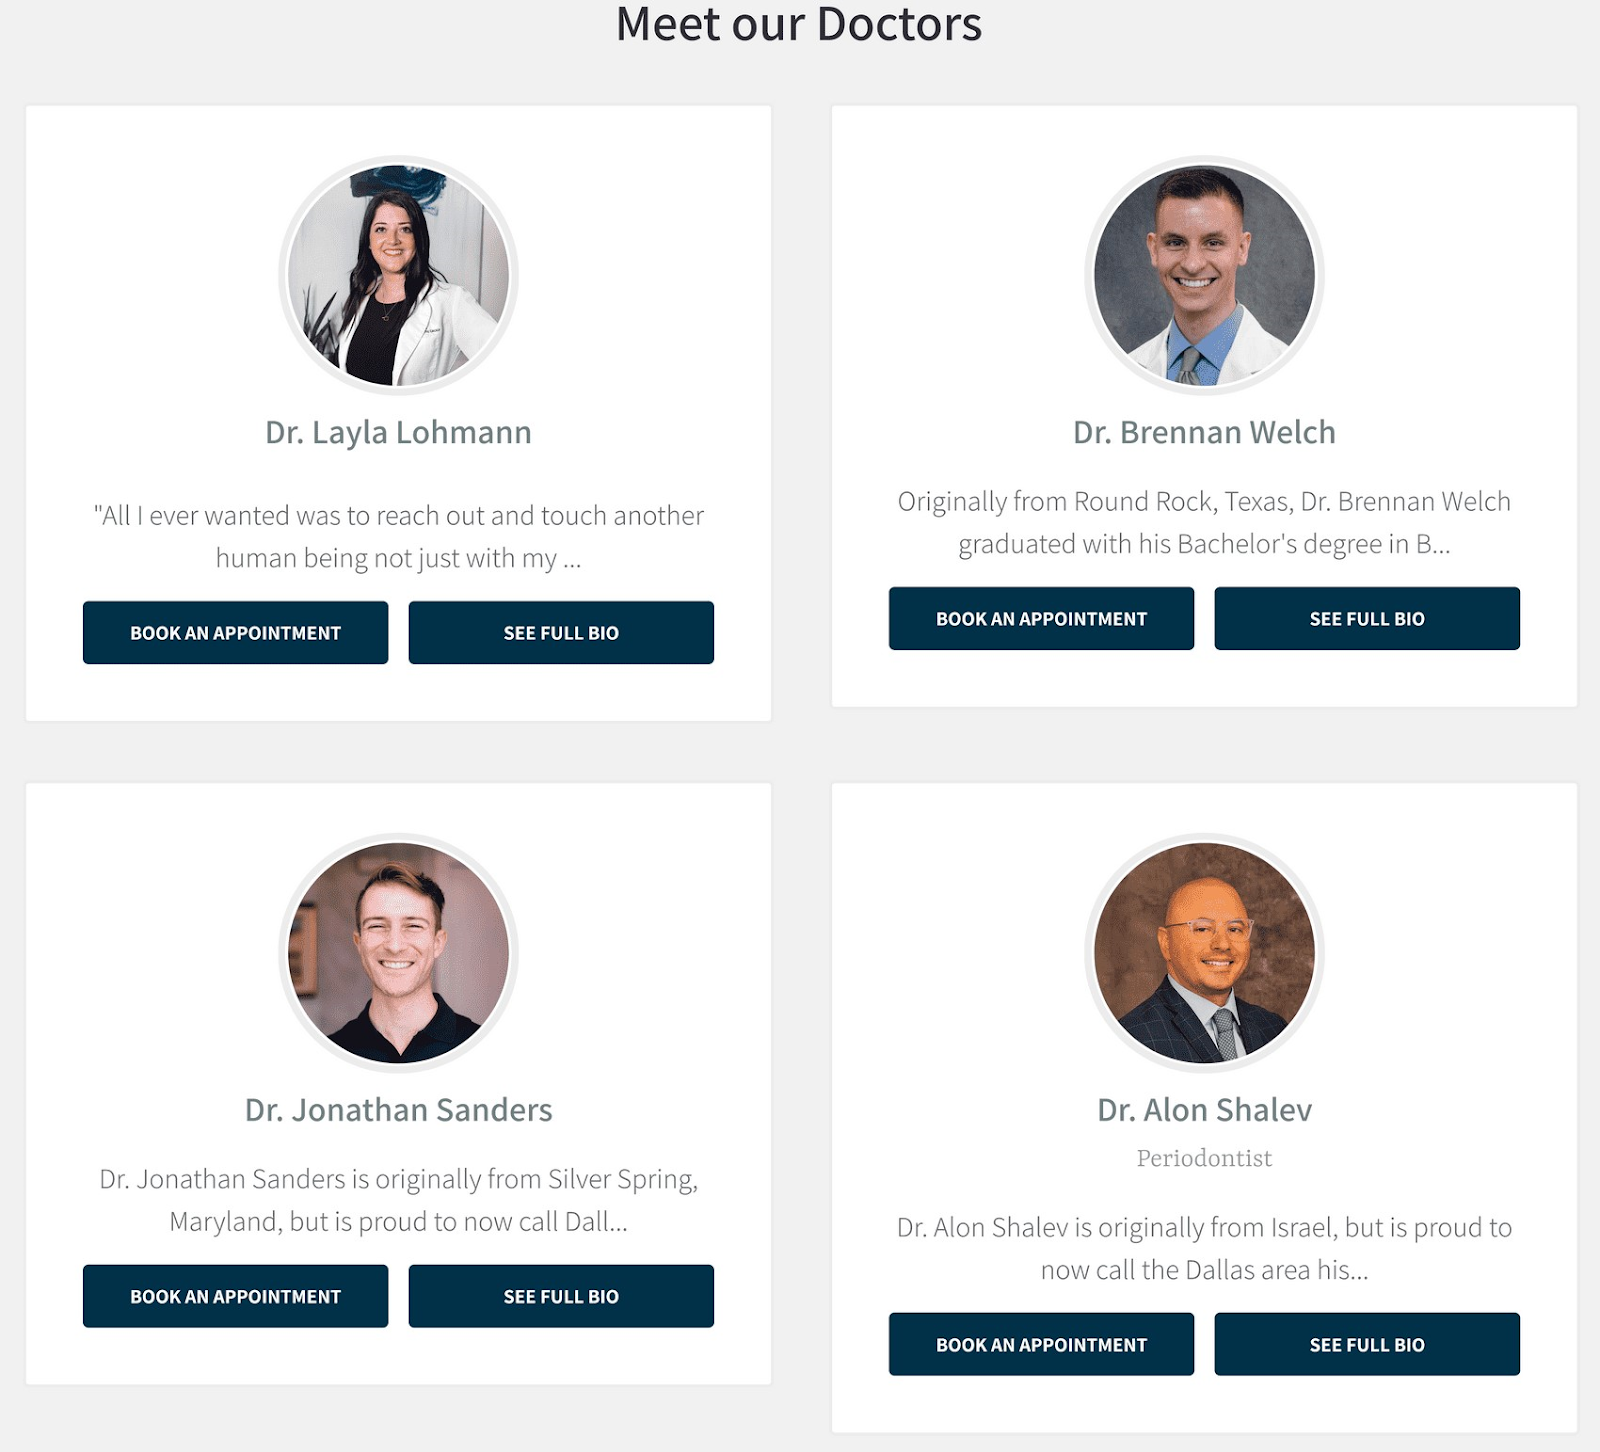 "Meet our Doctors" section of Dallas Dental homepage